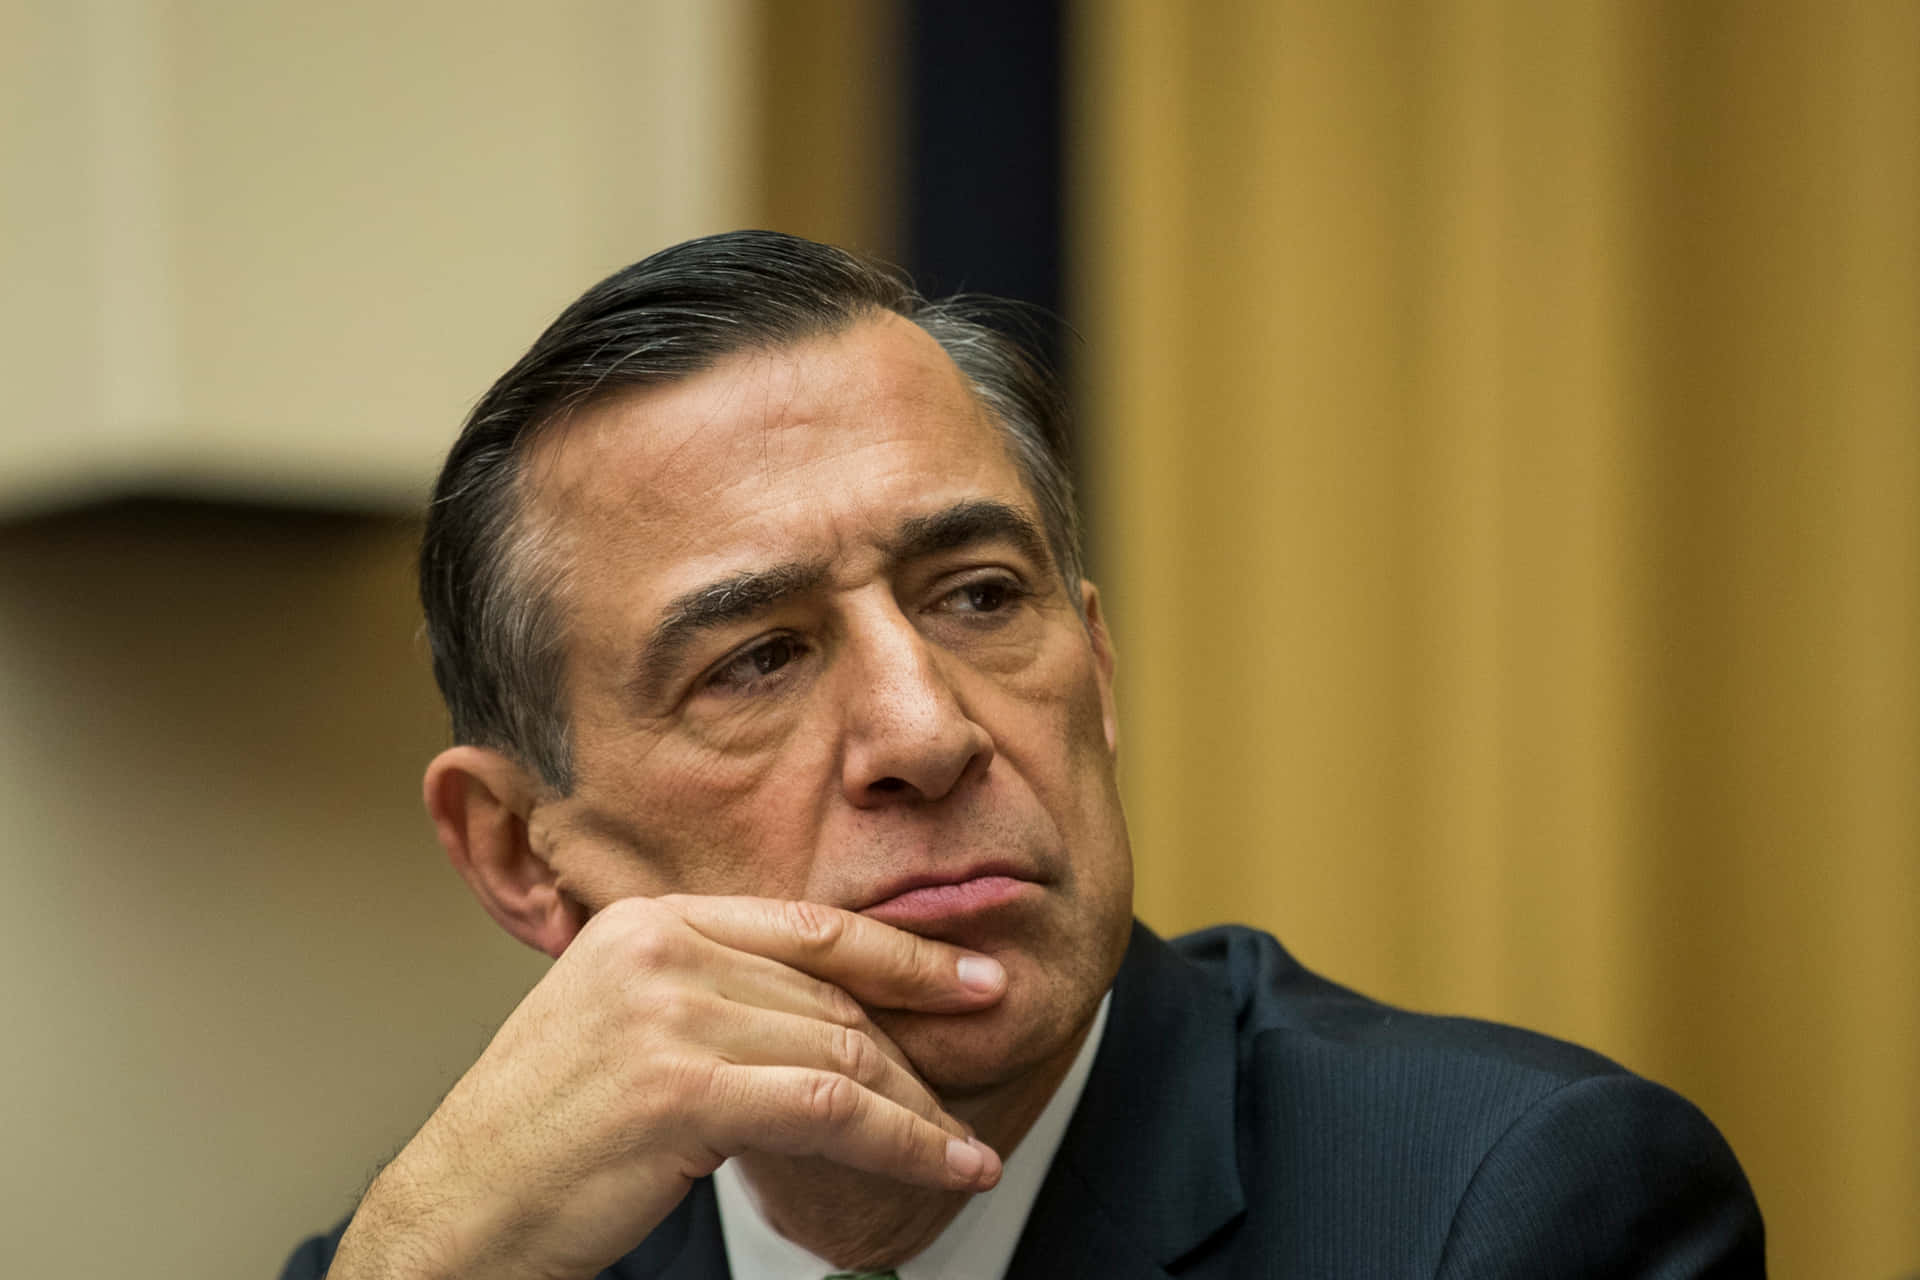 Darrell Issa With Hand On Chin Wallpaper